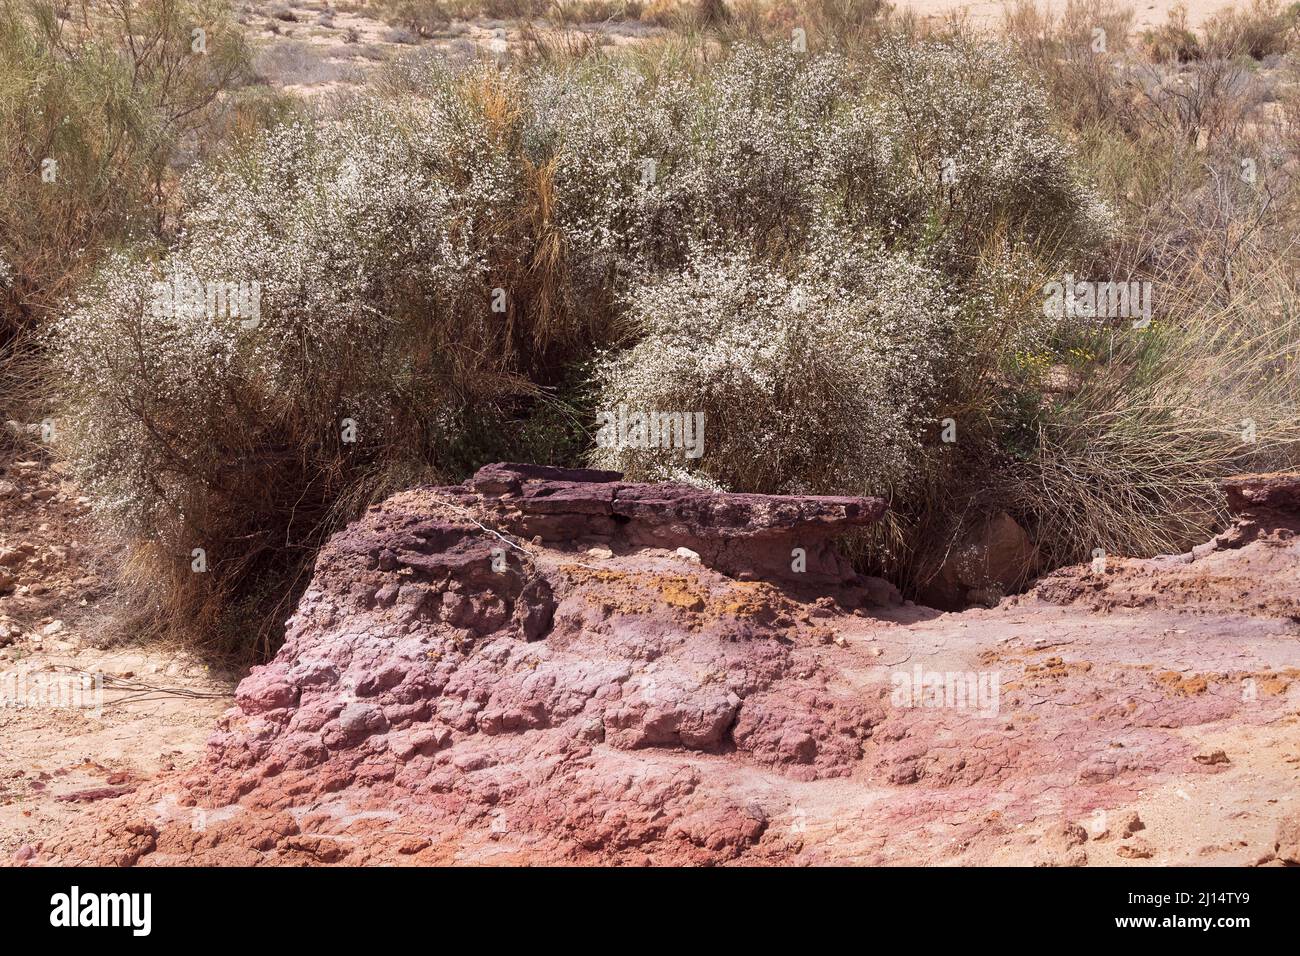 white broom Retama raetam in full bloom behind a colorful stone outcrop in the Yeruham Large Makhtesh erosion crater in the Negev in Israel Stock Photo